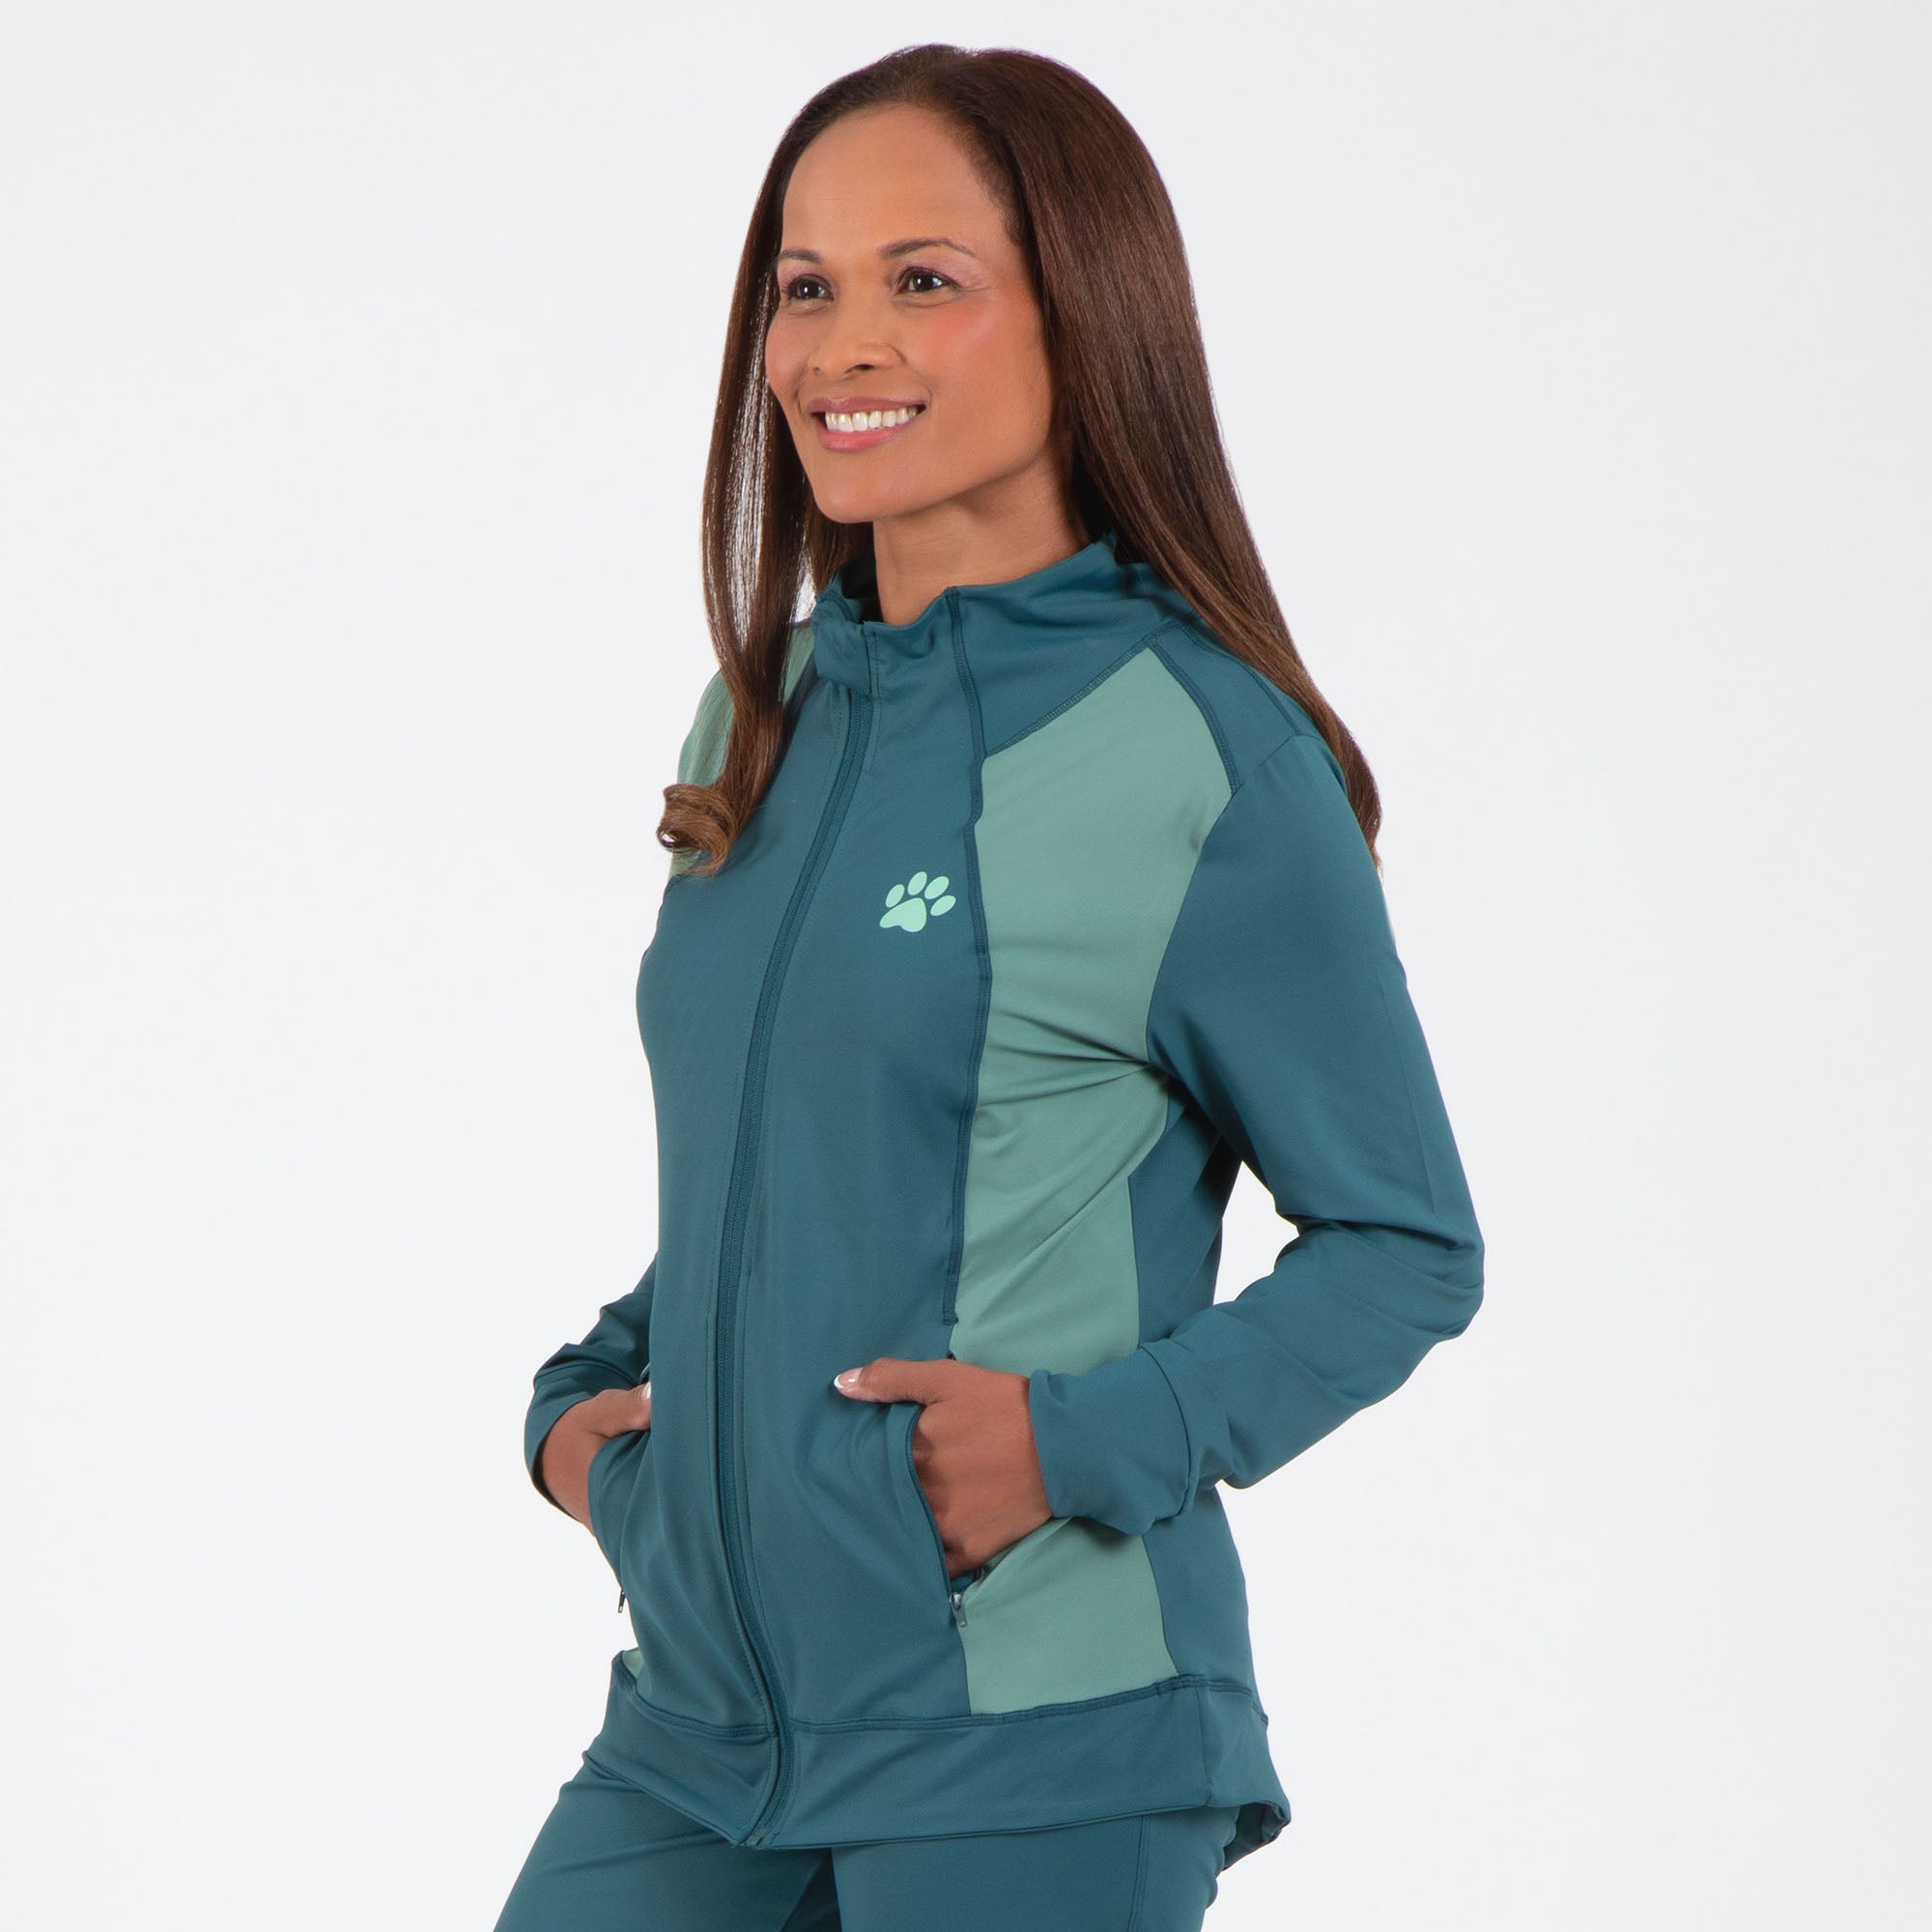 Yoga Paw Print Cross Over Separates - Teal - Jacket - 3X